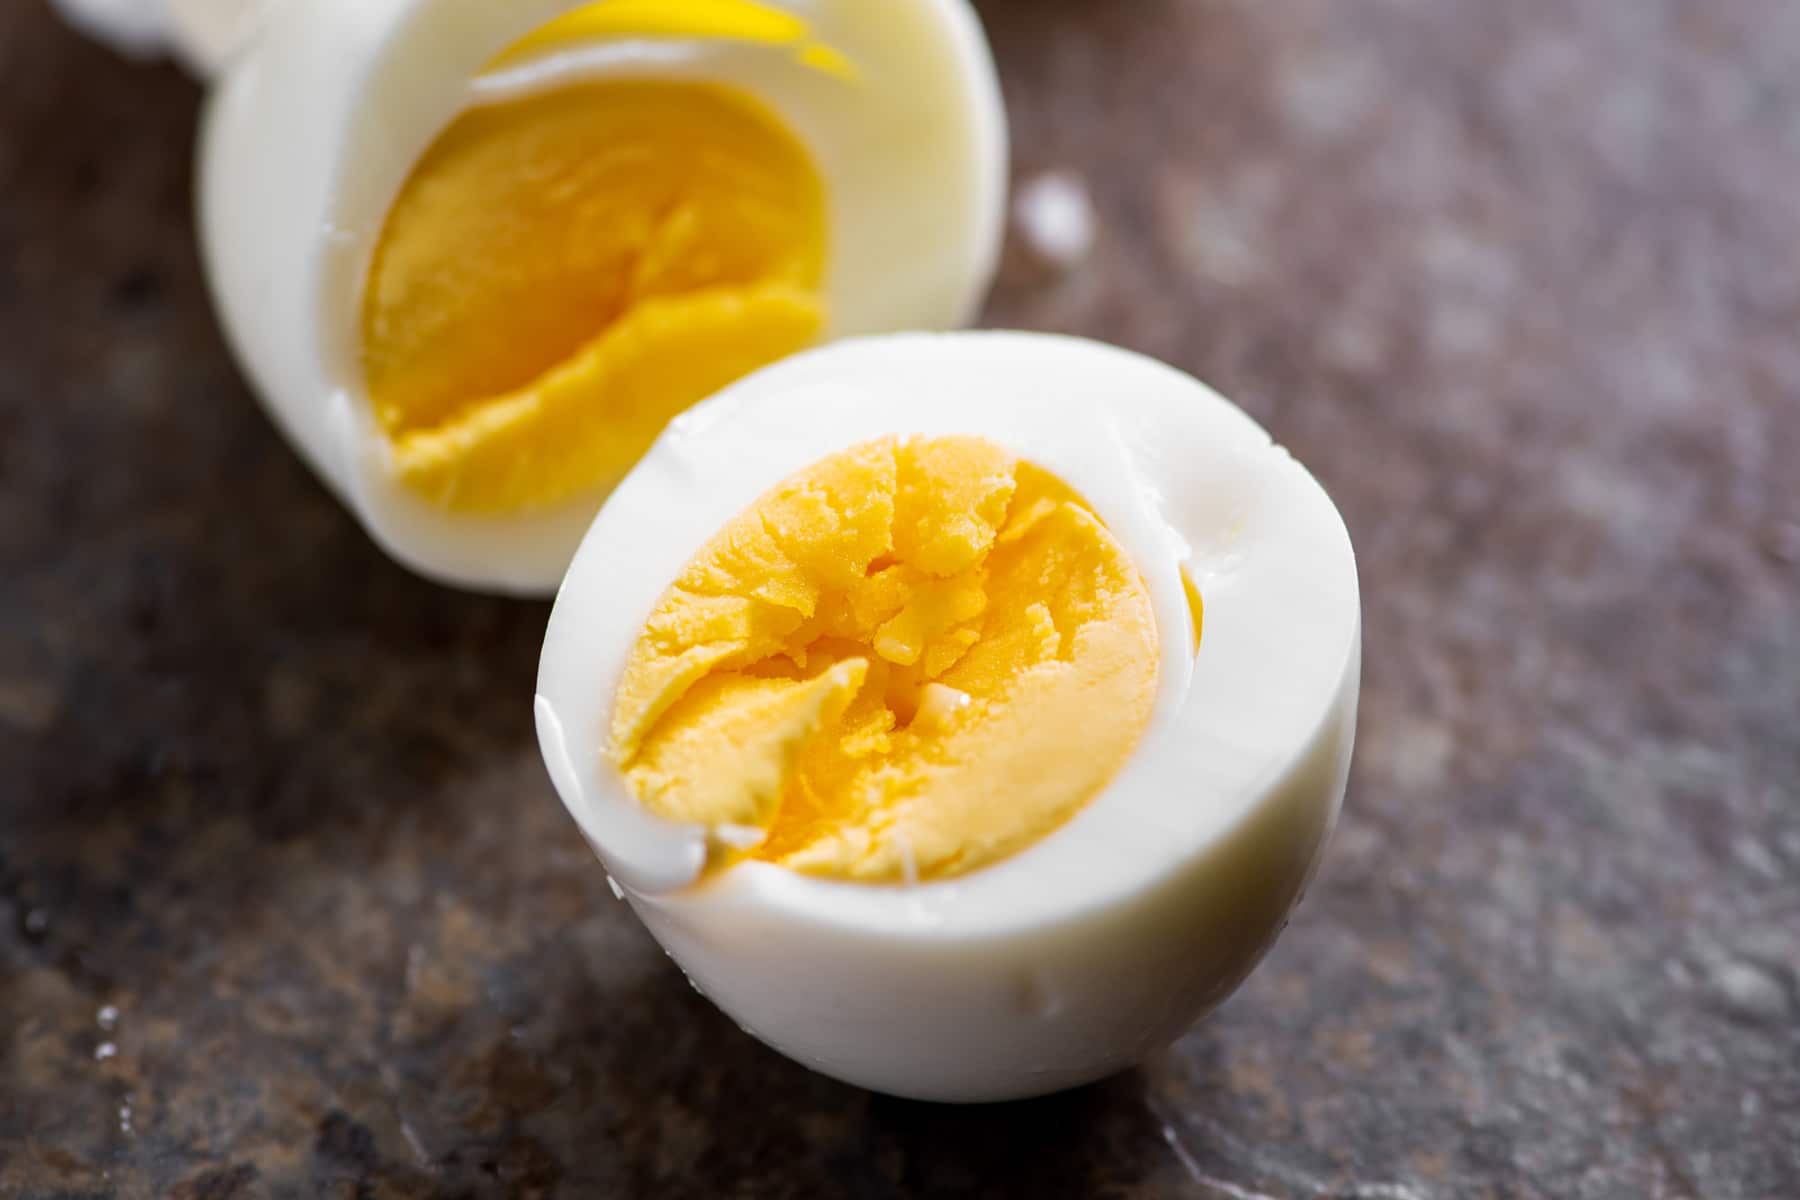 How To Make Perfect Hard Boiled Eggs The Mom 100